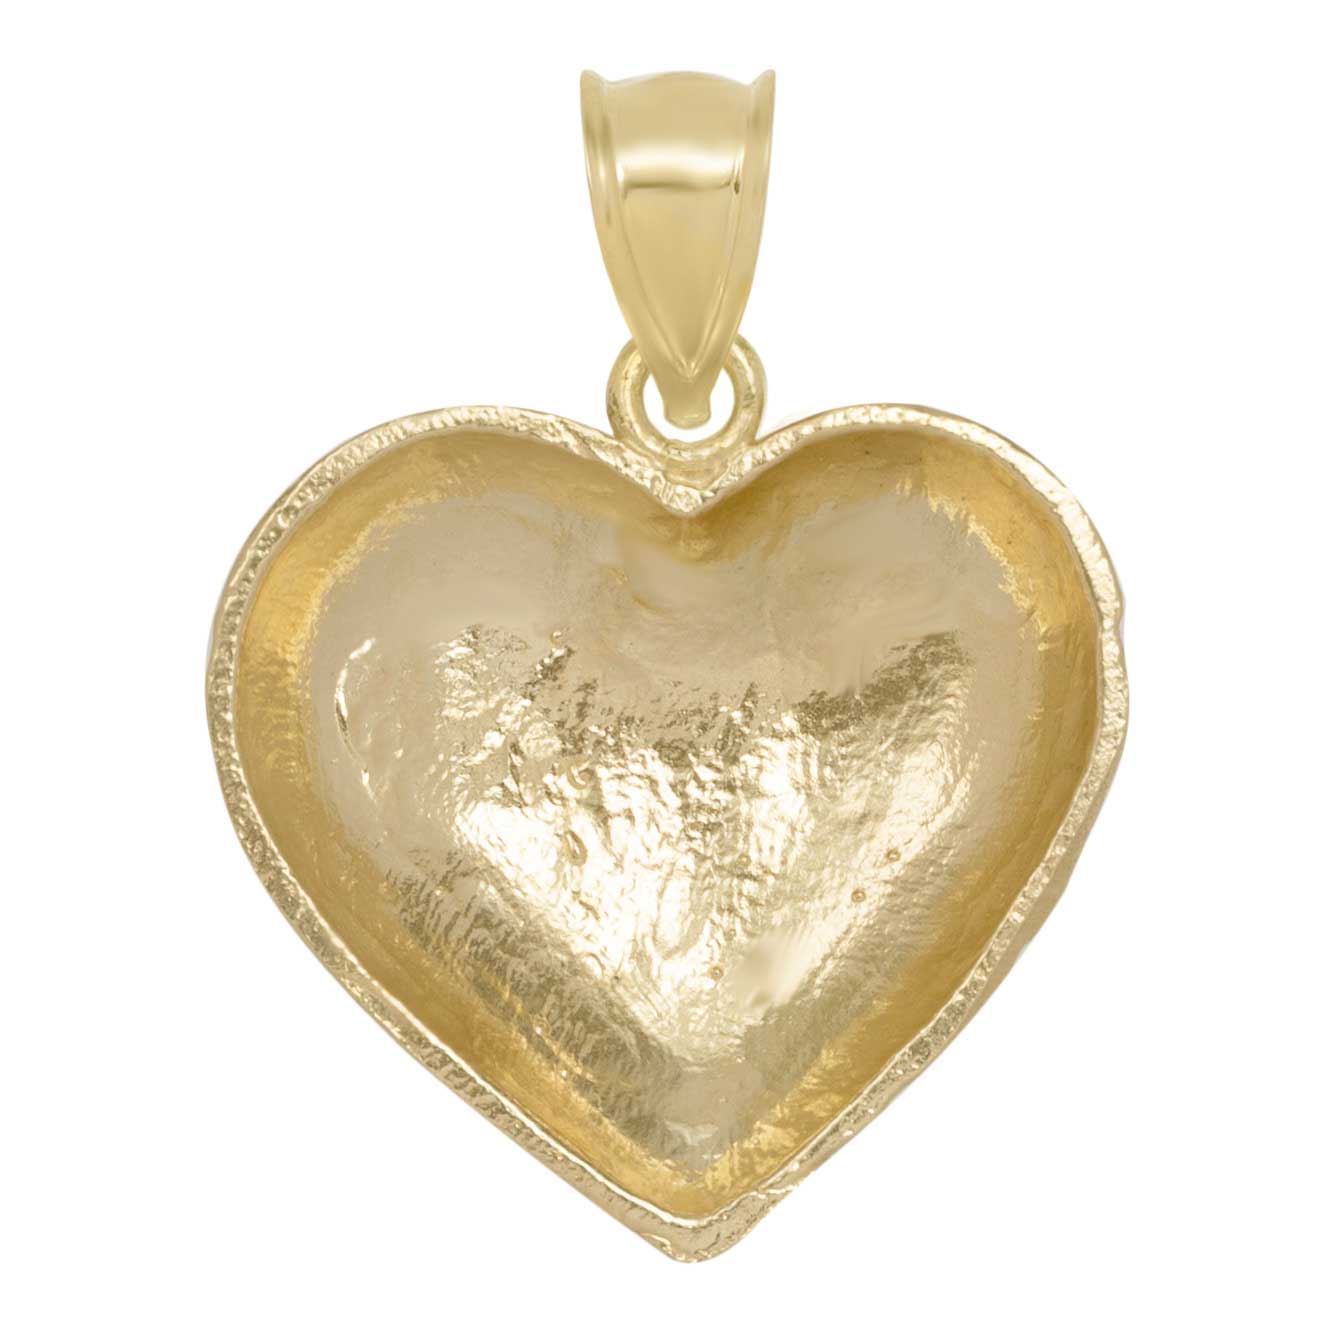 1 1/4" Textured Heart Pendant Solid 10K Yellow Gold